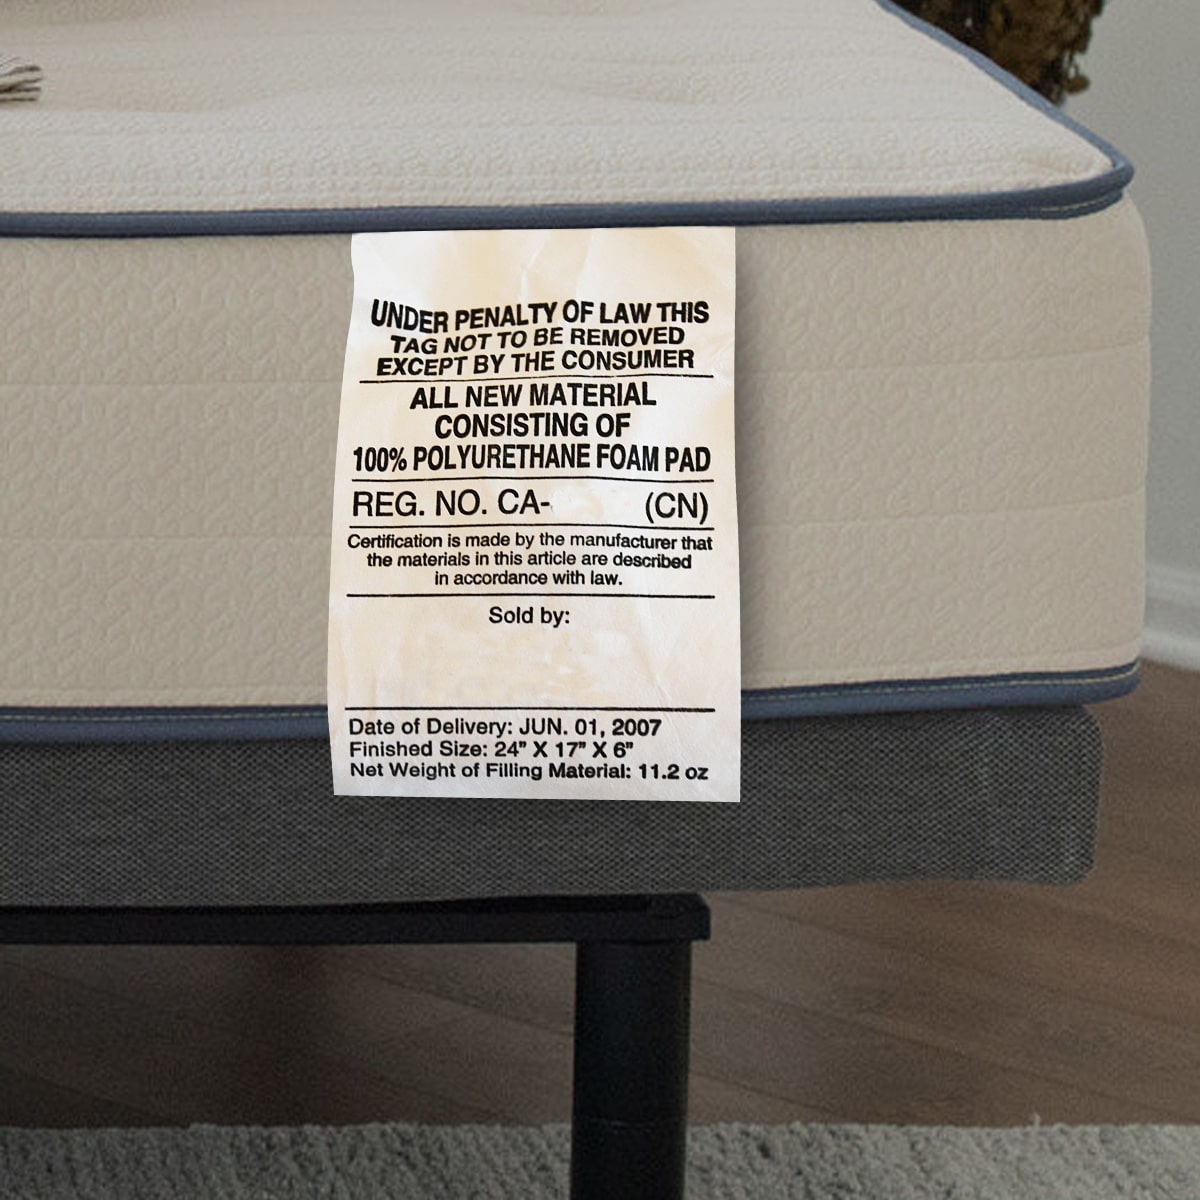 What To Do When The Mattress Tag Is Missing?